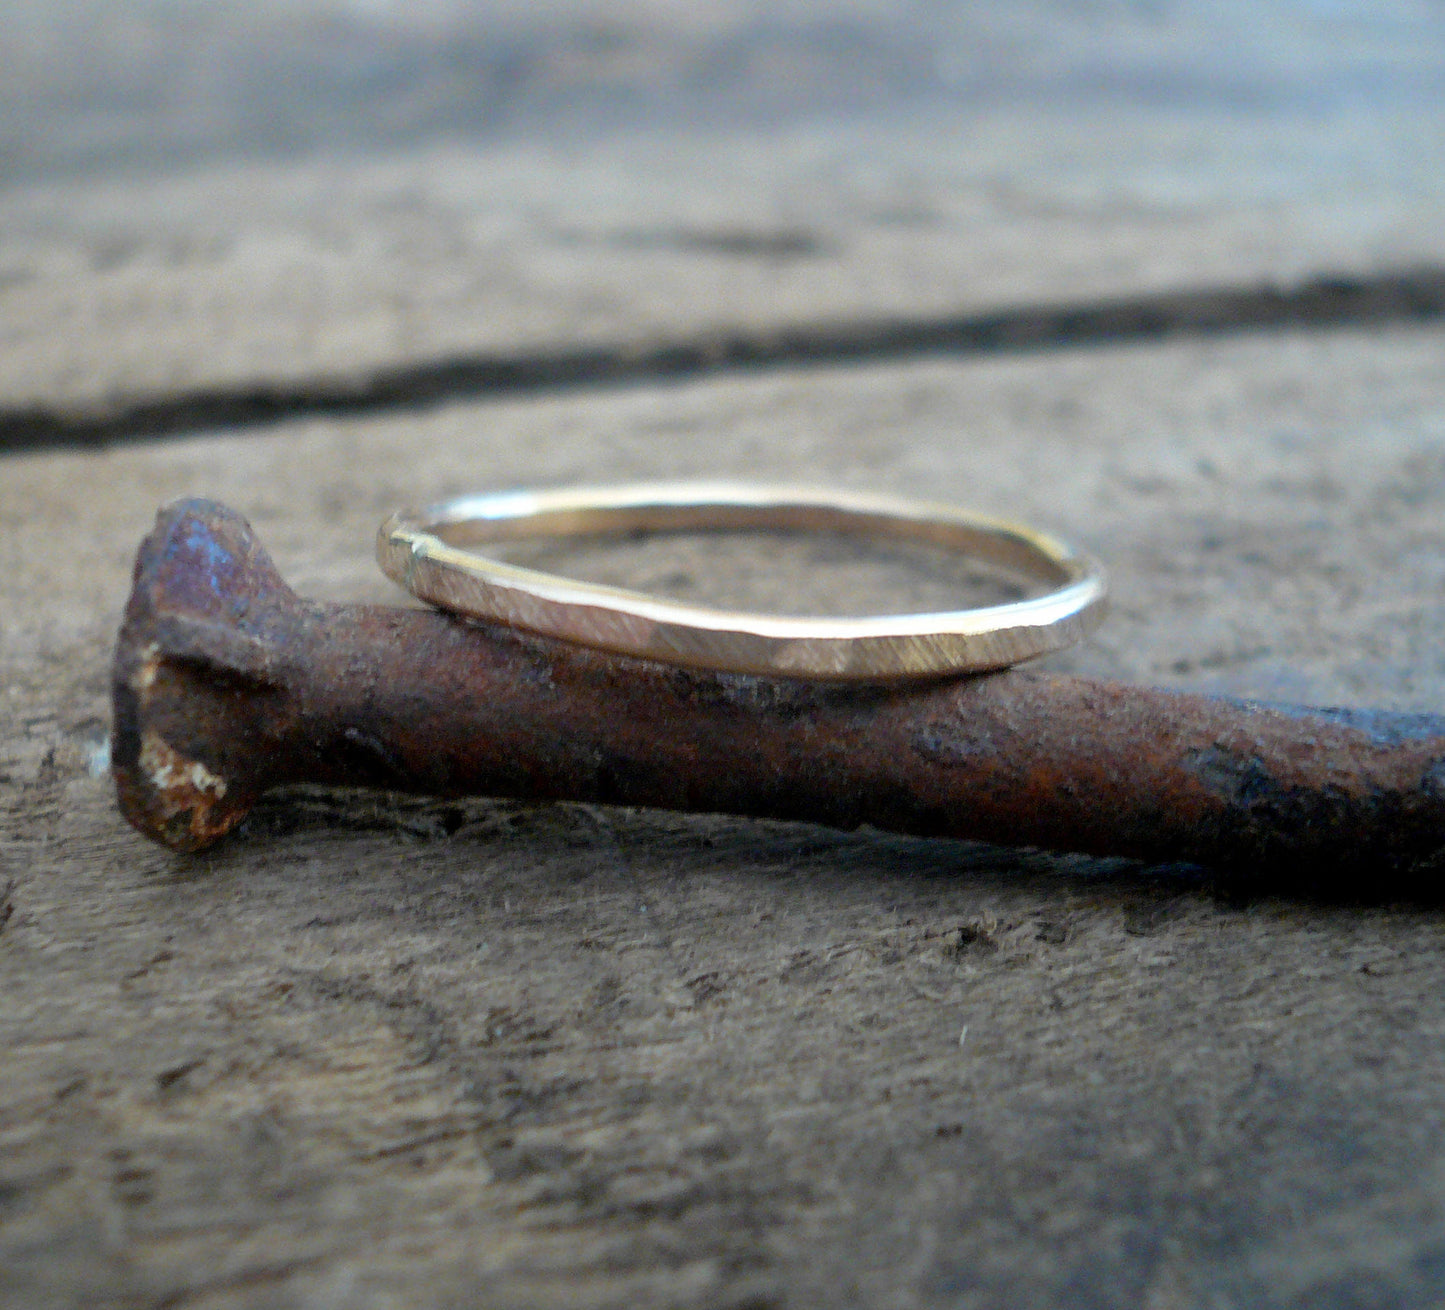 Every Day Ring - 14kt Goldfill Stacking Ring. Handmade. Hand forged.